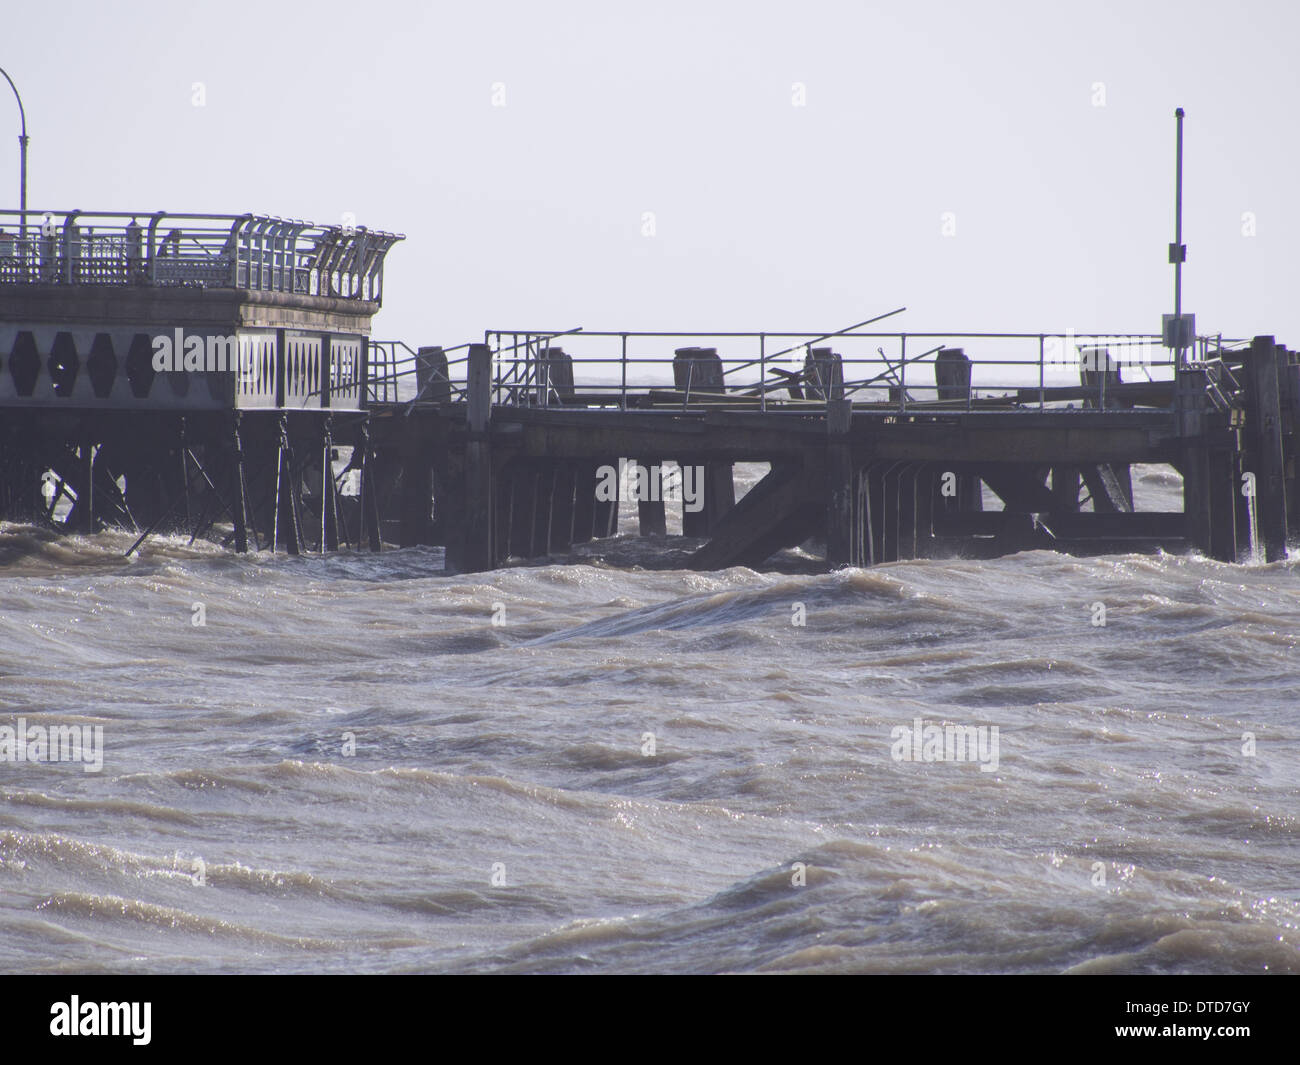 Damage caused to South Parade Pier, Southsea Portsmouth, England after weeks extreme weather. Stock Photo